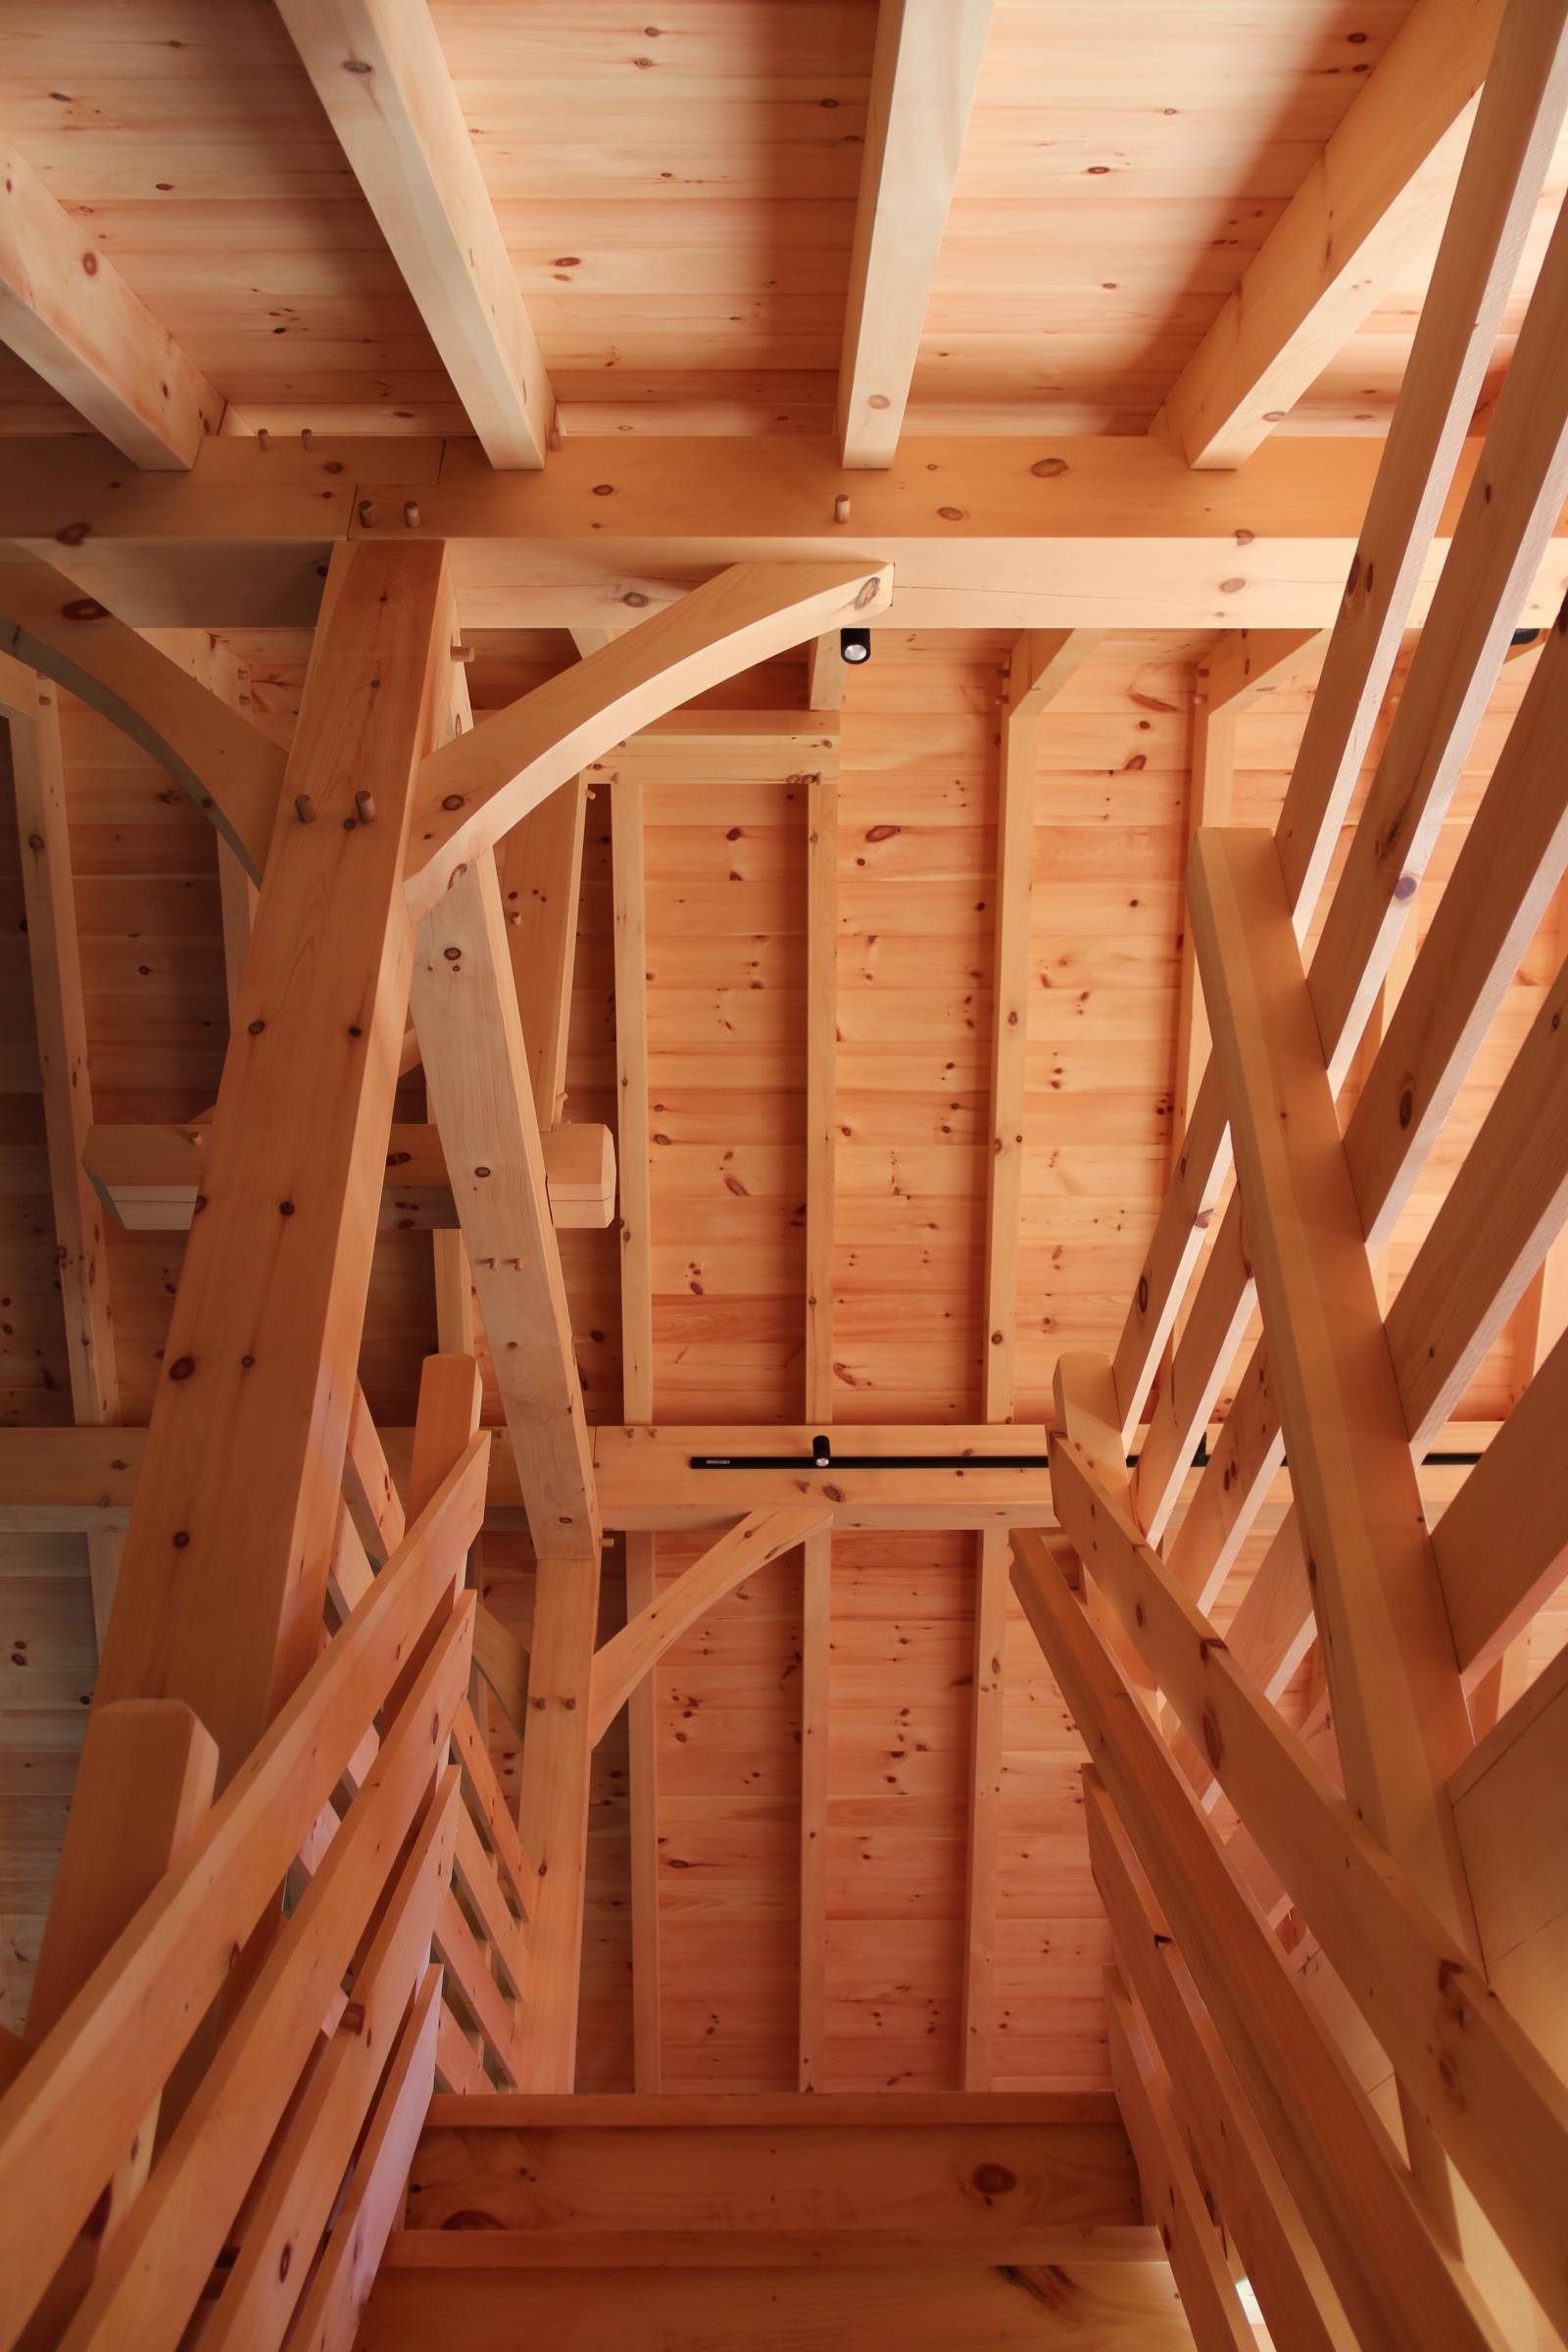 Stairway to Loft • Authentic Timber Frame Joinery with Oak Pegs • 4x8 Hemlock Rafters